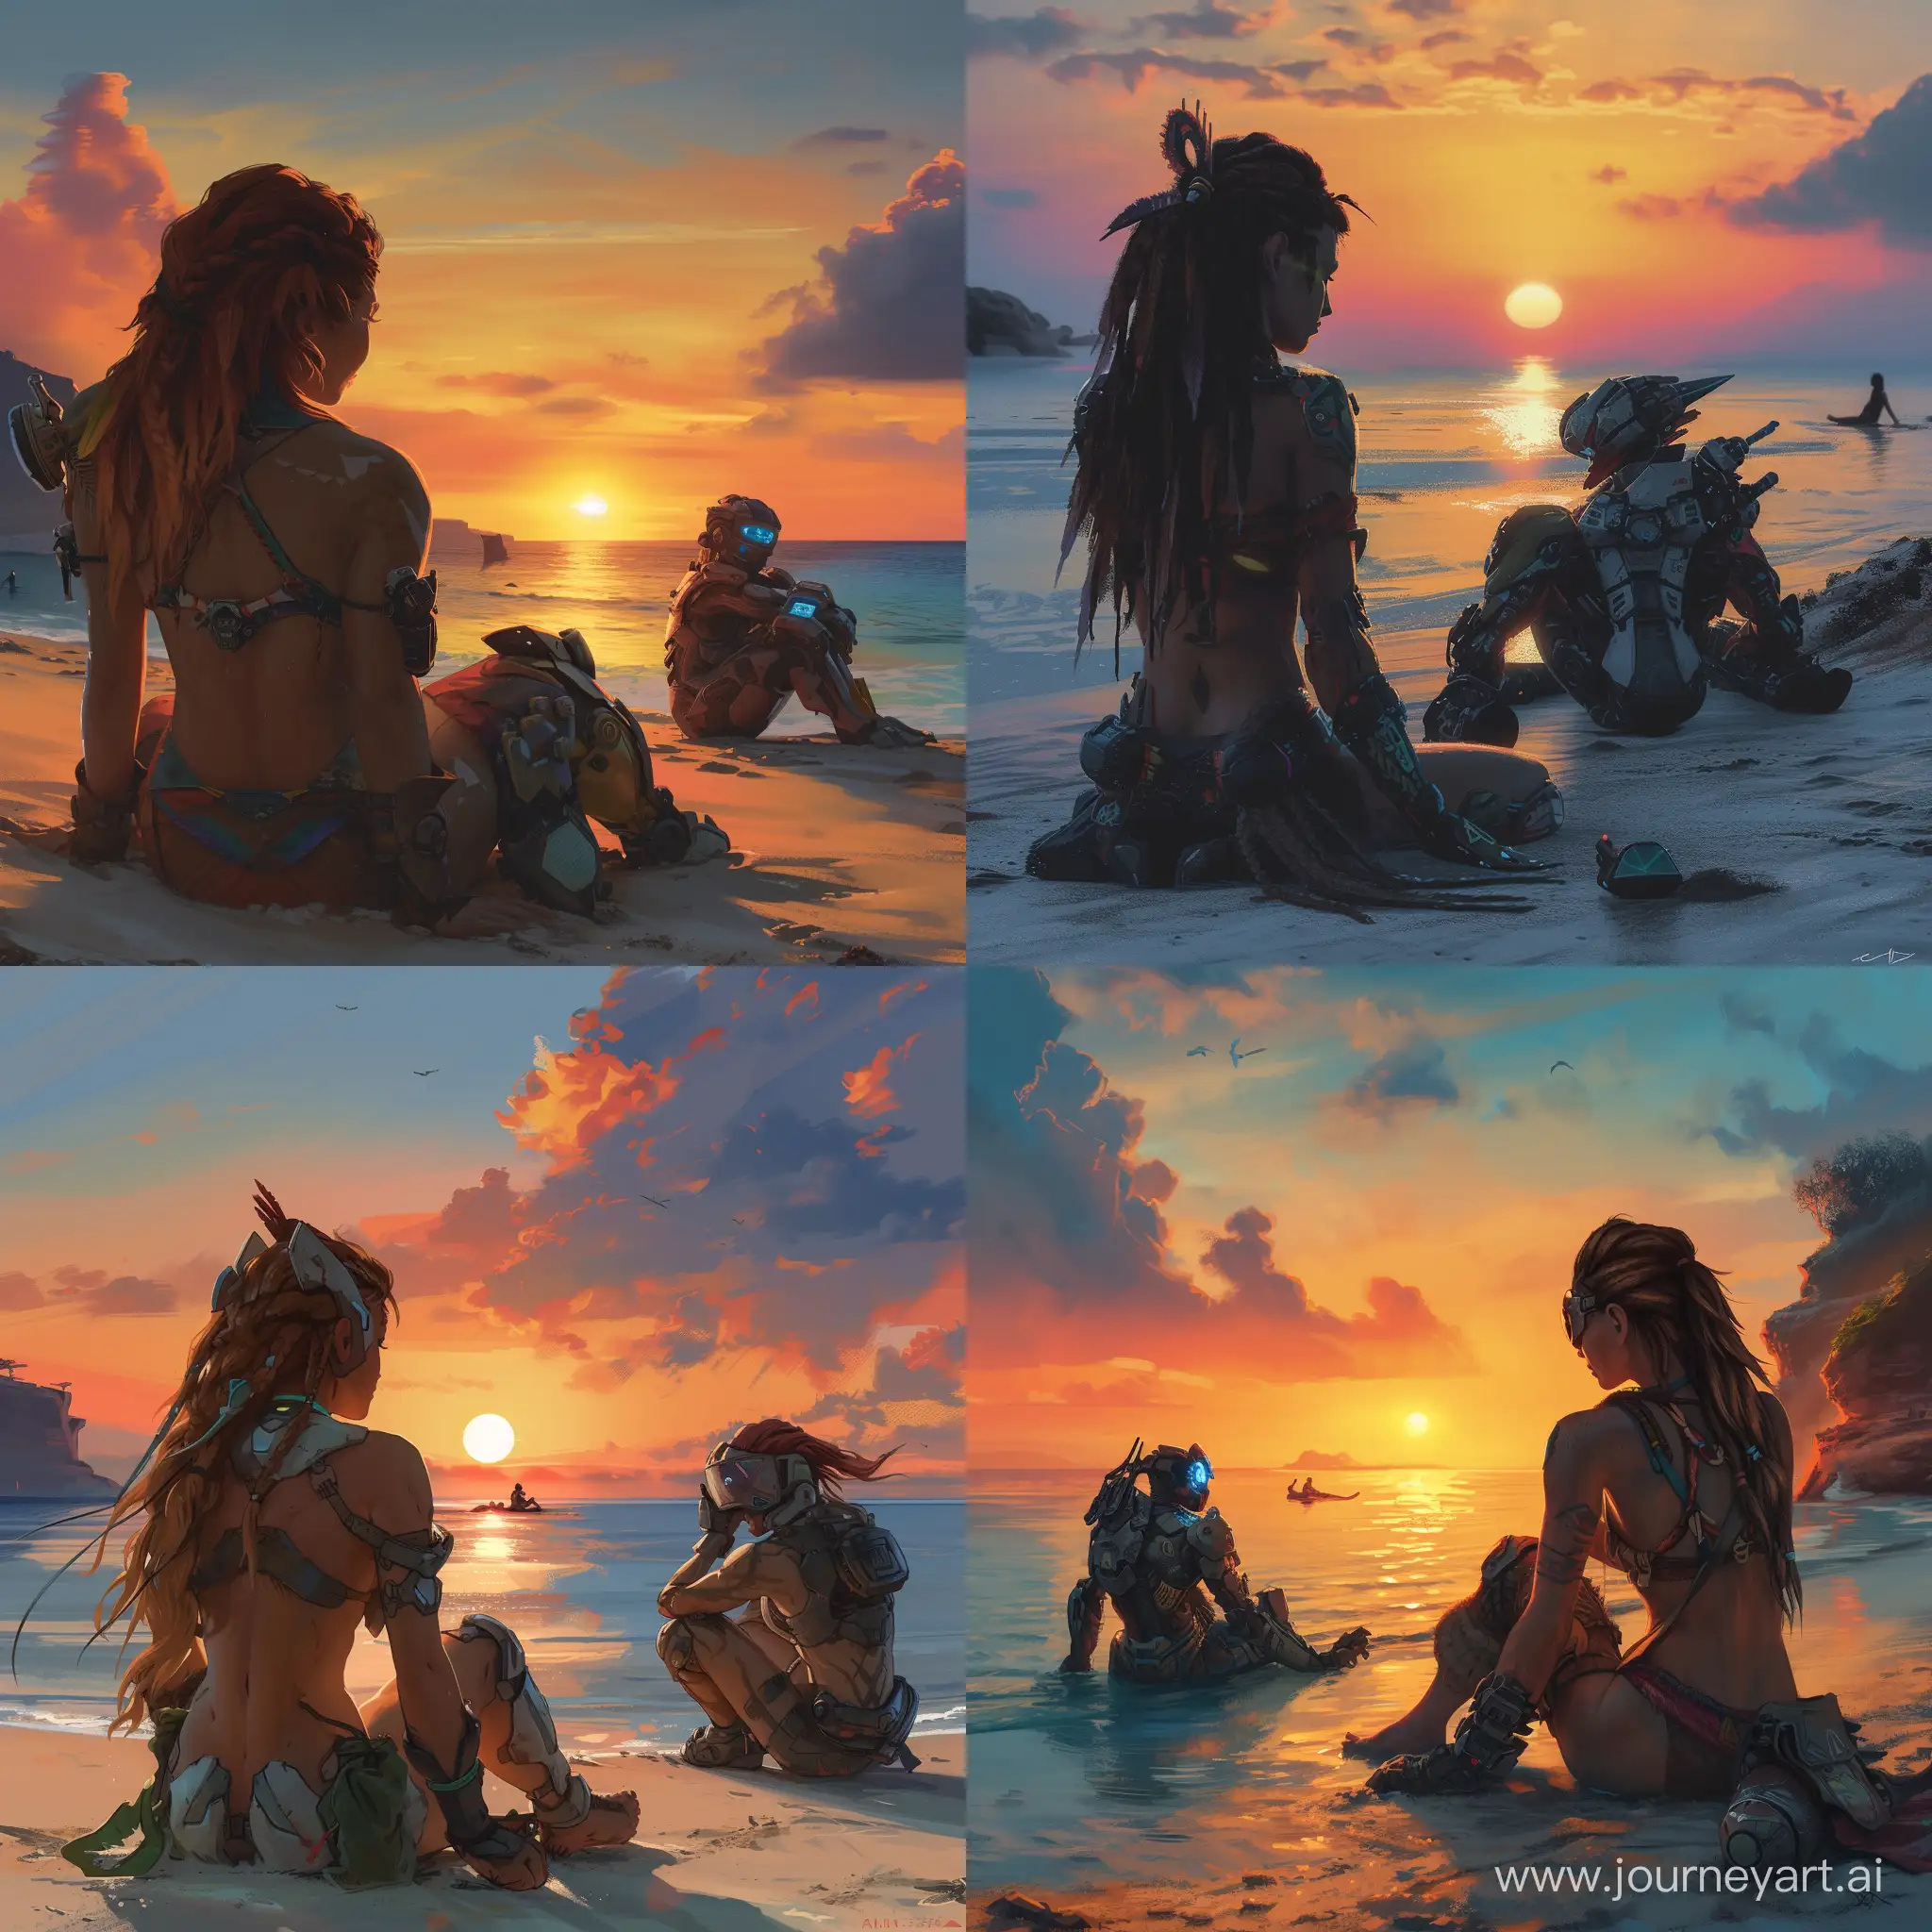 Aloy-in-Swimsuit-Watches-Sunset-with-Strider-and-Erend-Learns-Visor-at-Seashore